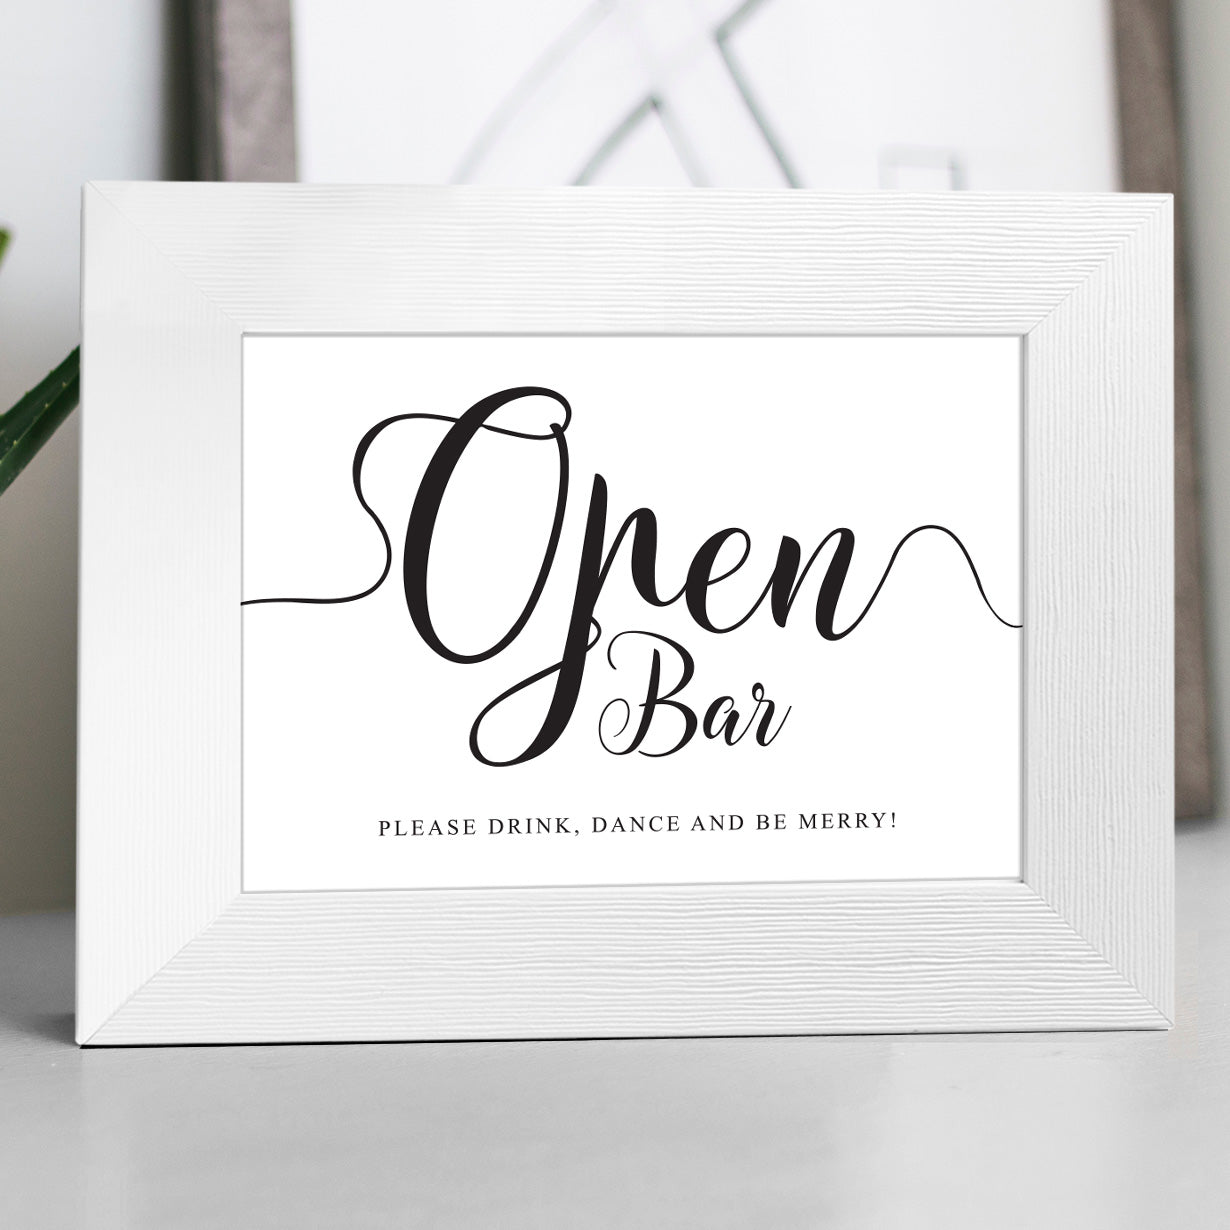 It's an open bar printable sign. Drinks are on the house